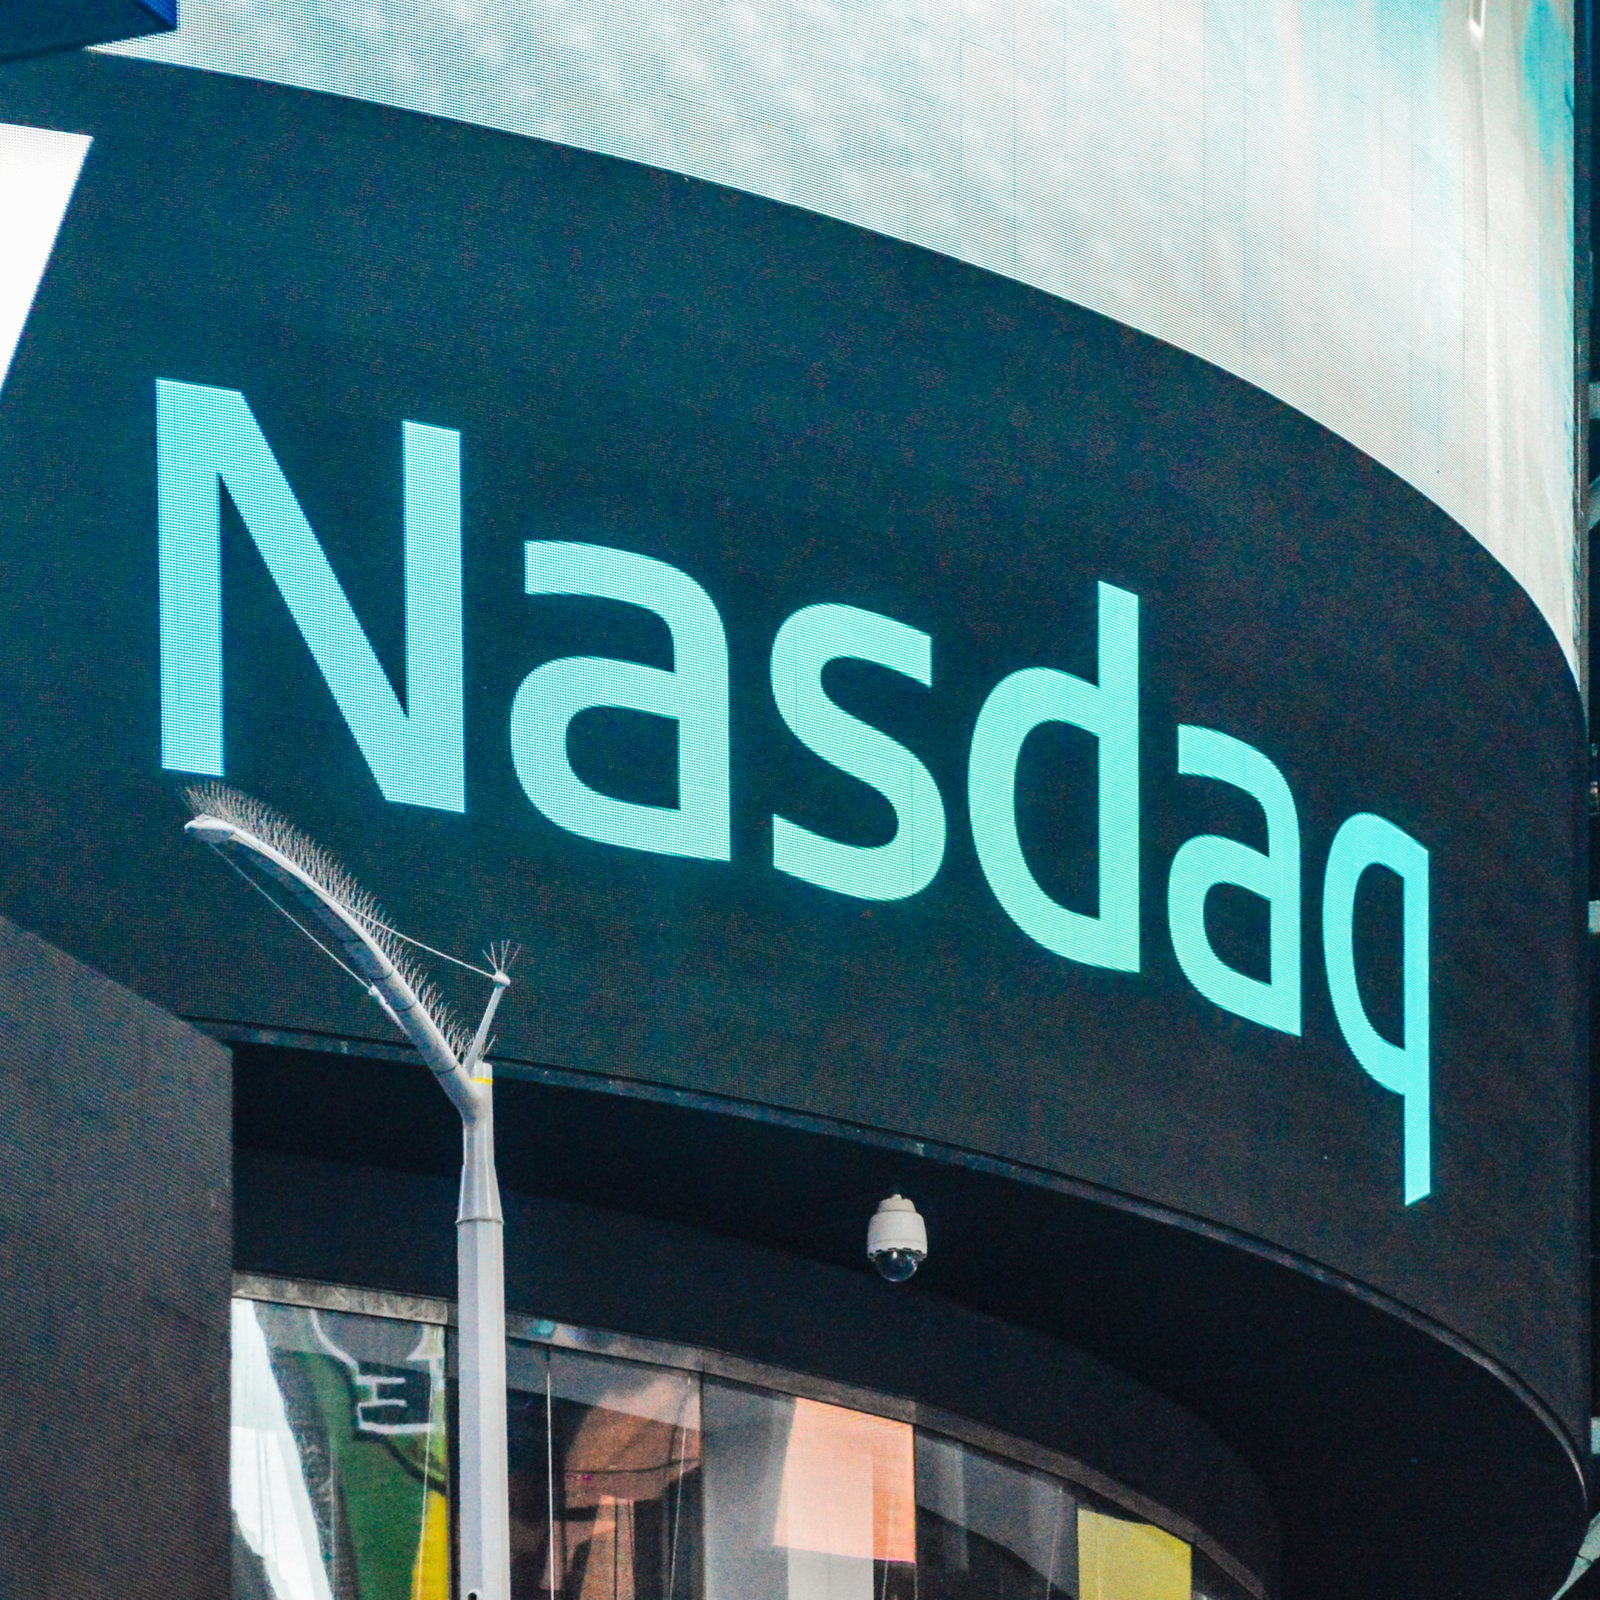 Nasdaq Issued Bitcoin Futures Contracts May Comprise "Investment" Rather Than "Tracking Stock"